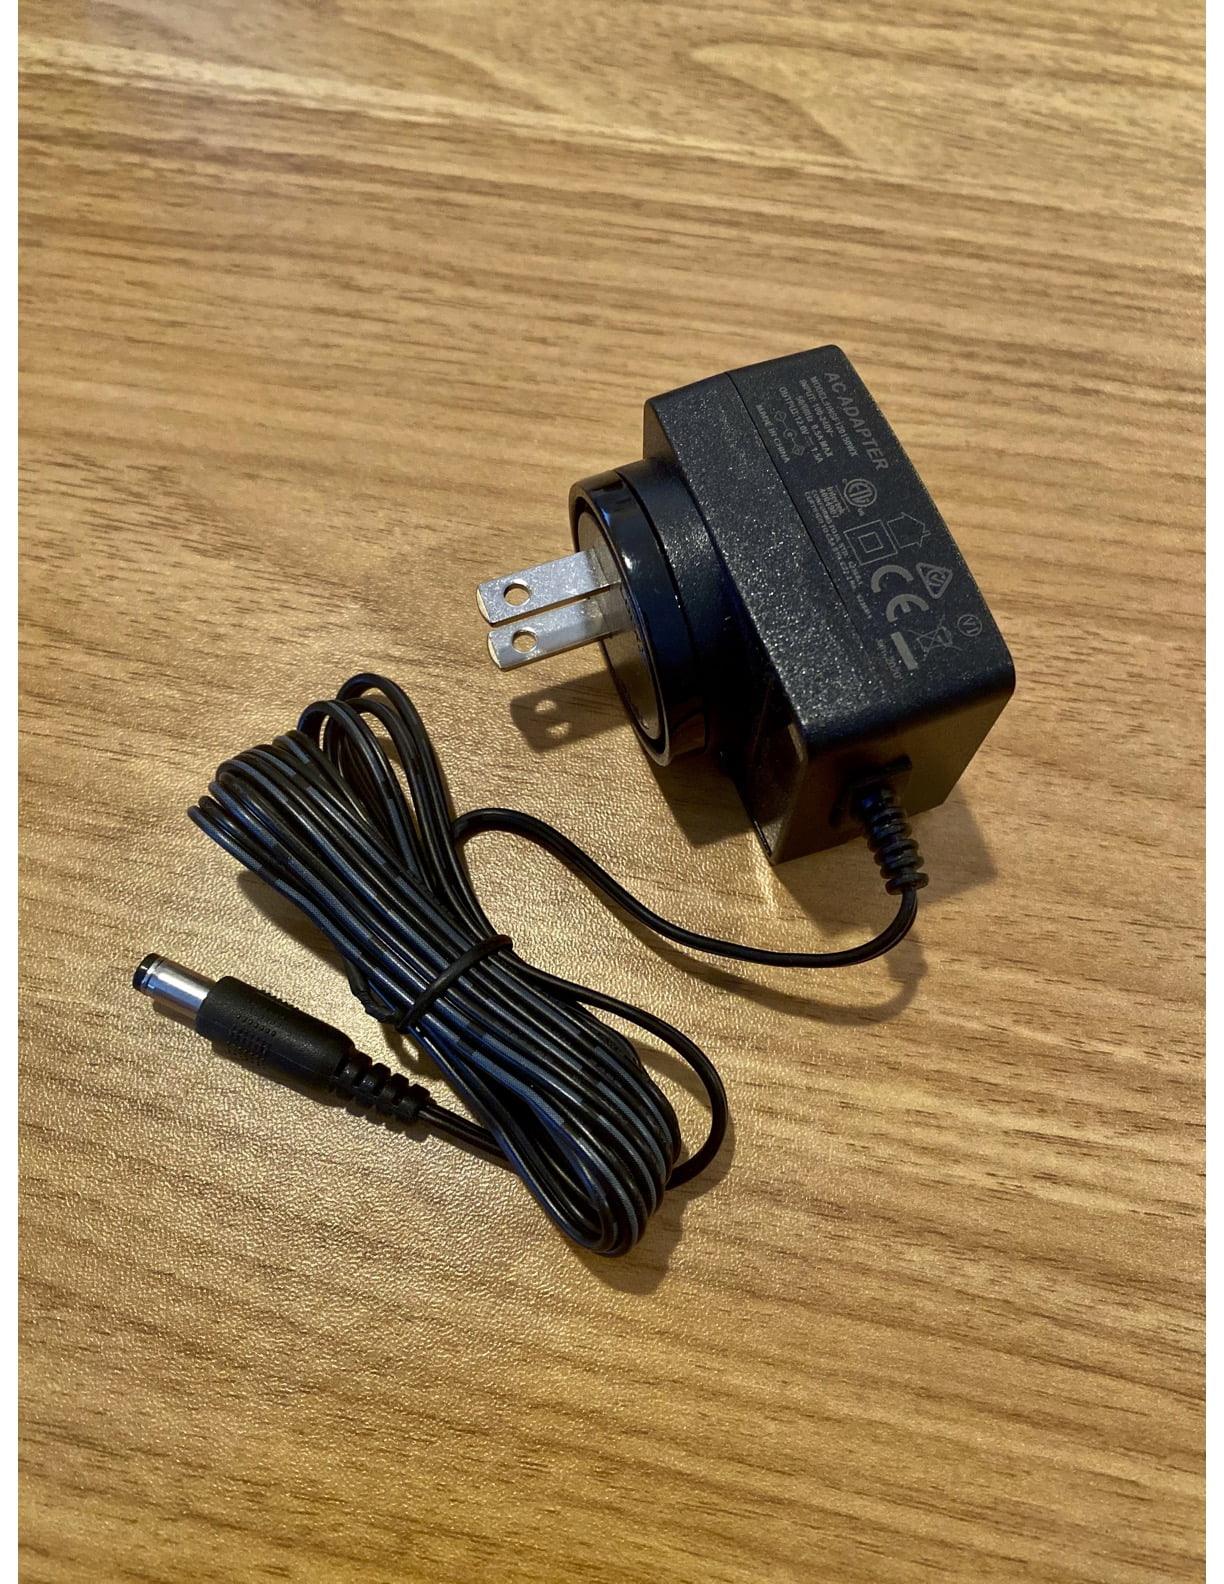 Photo of replacement black power cord for the Cube and Ultra models